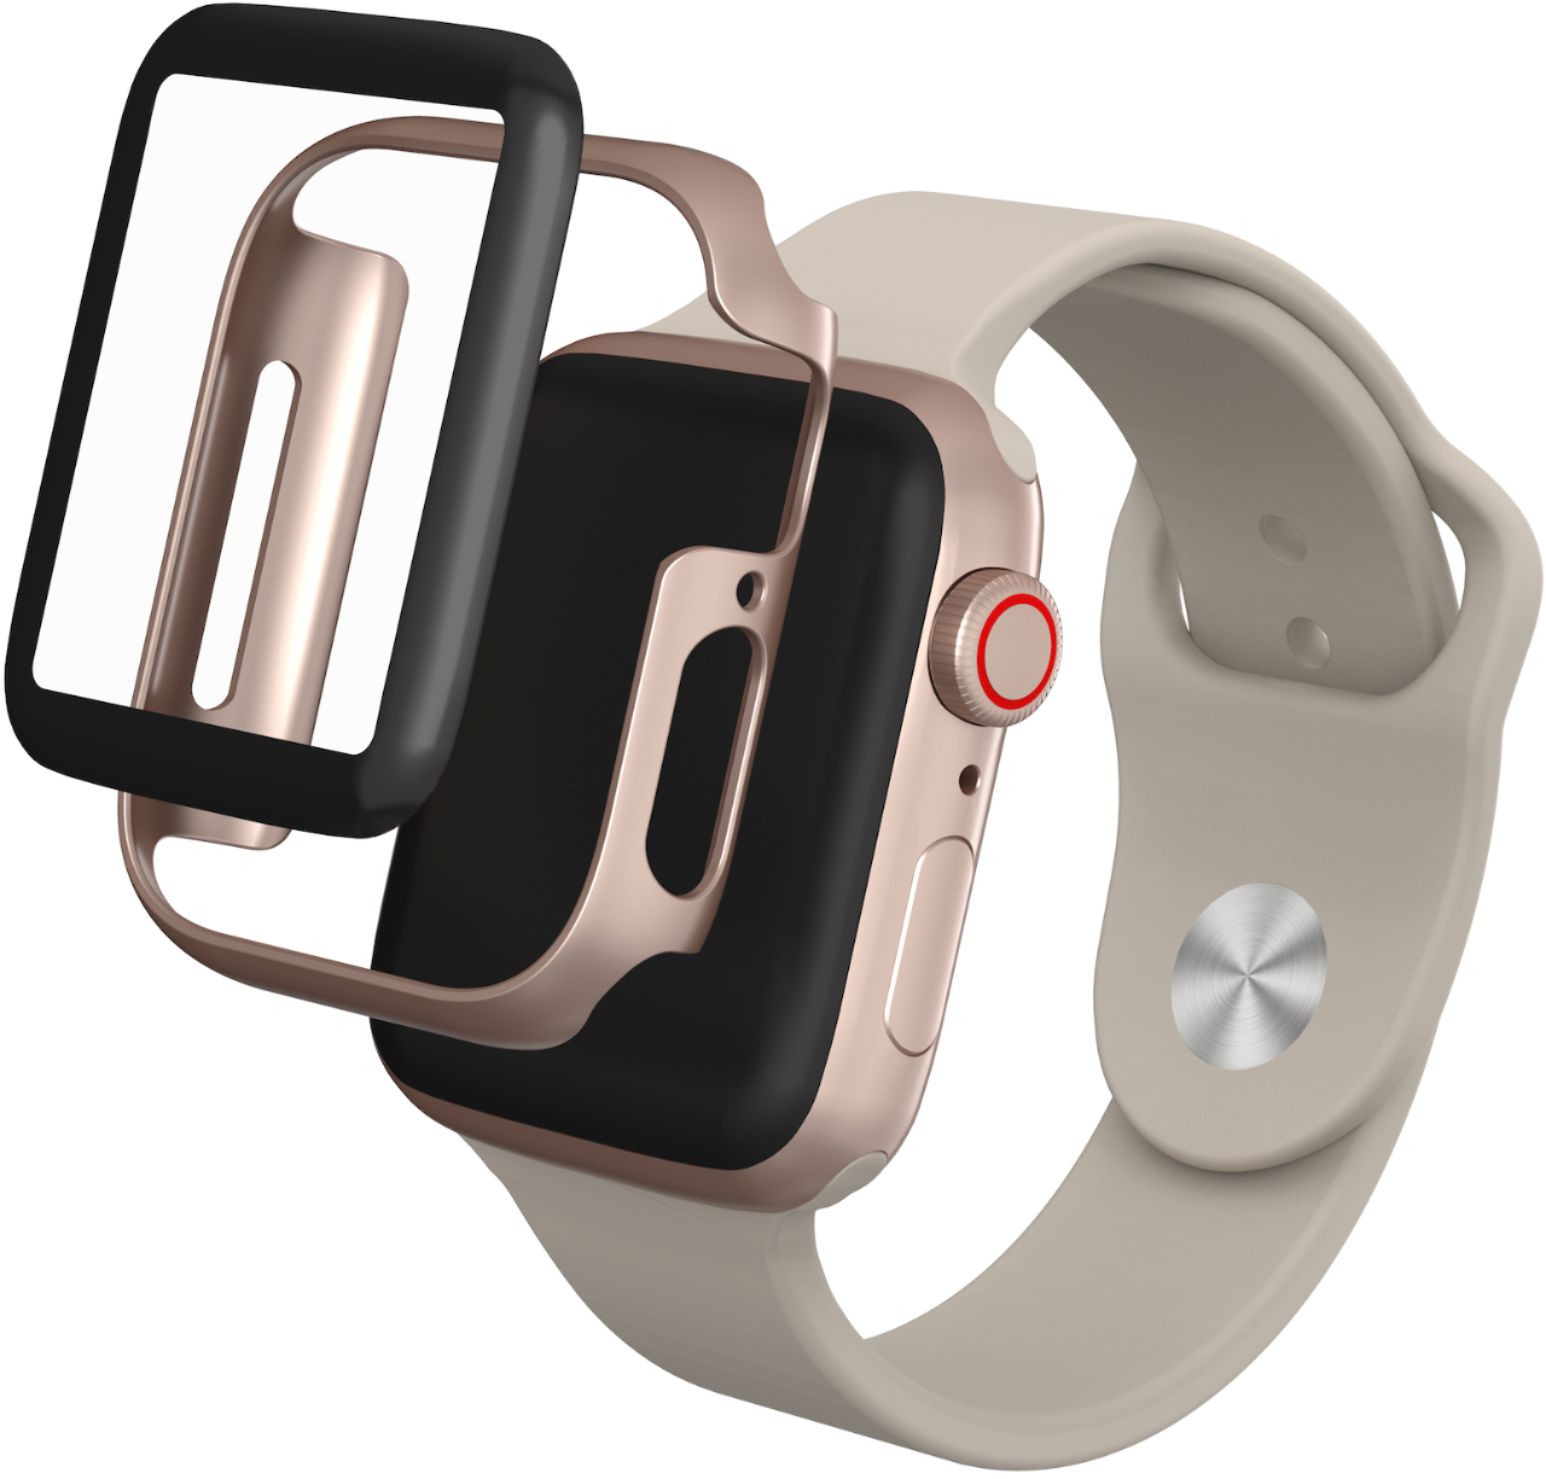 Angle View: ZAGG - InvisibleShield GlassFusion 360 Screen Protector for Apple Watch Series 4, Series 5, SE, Series 6 40mm - Gold